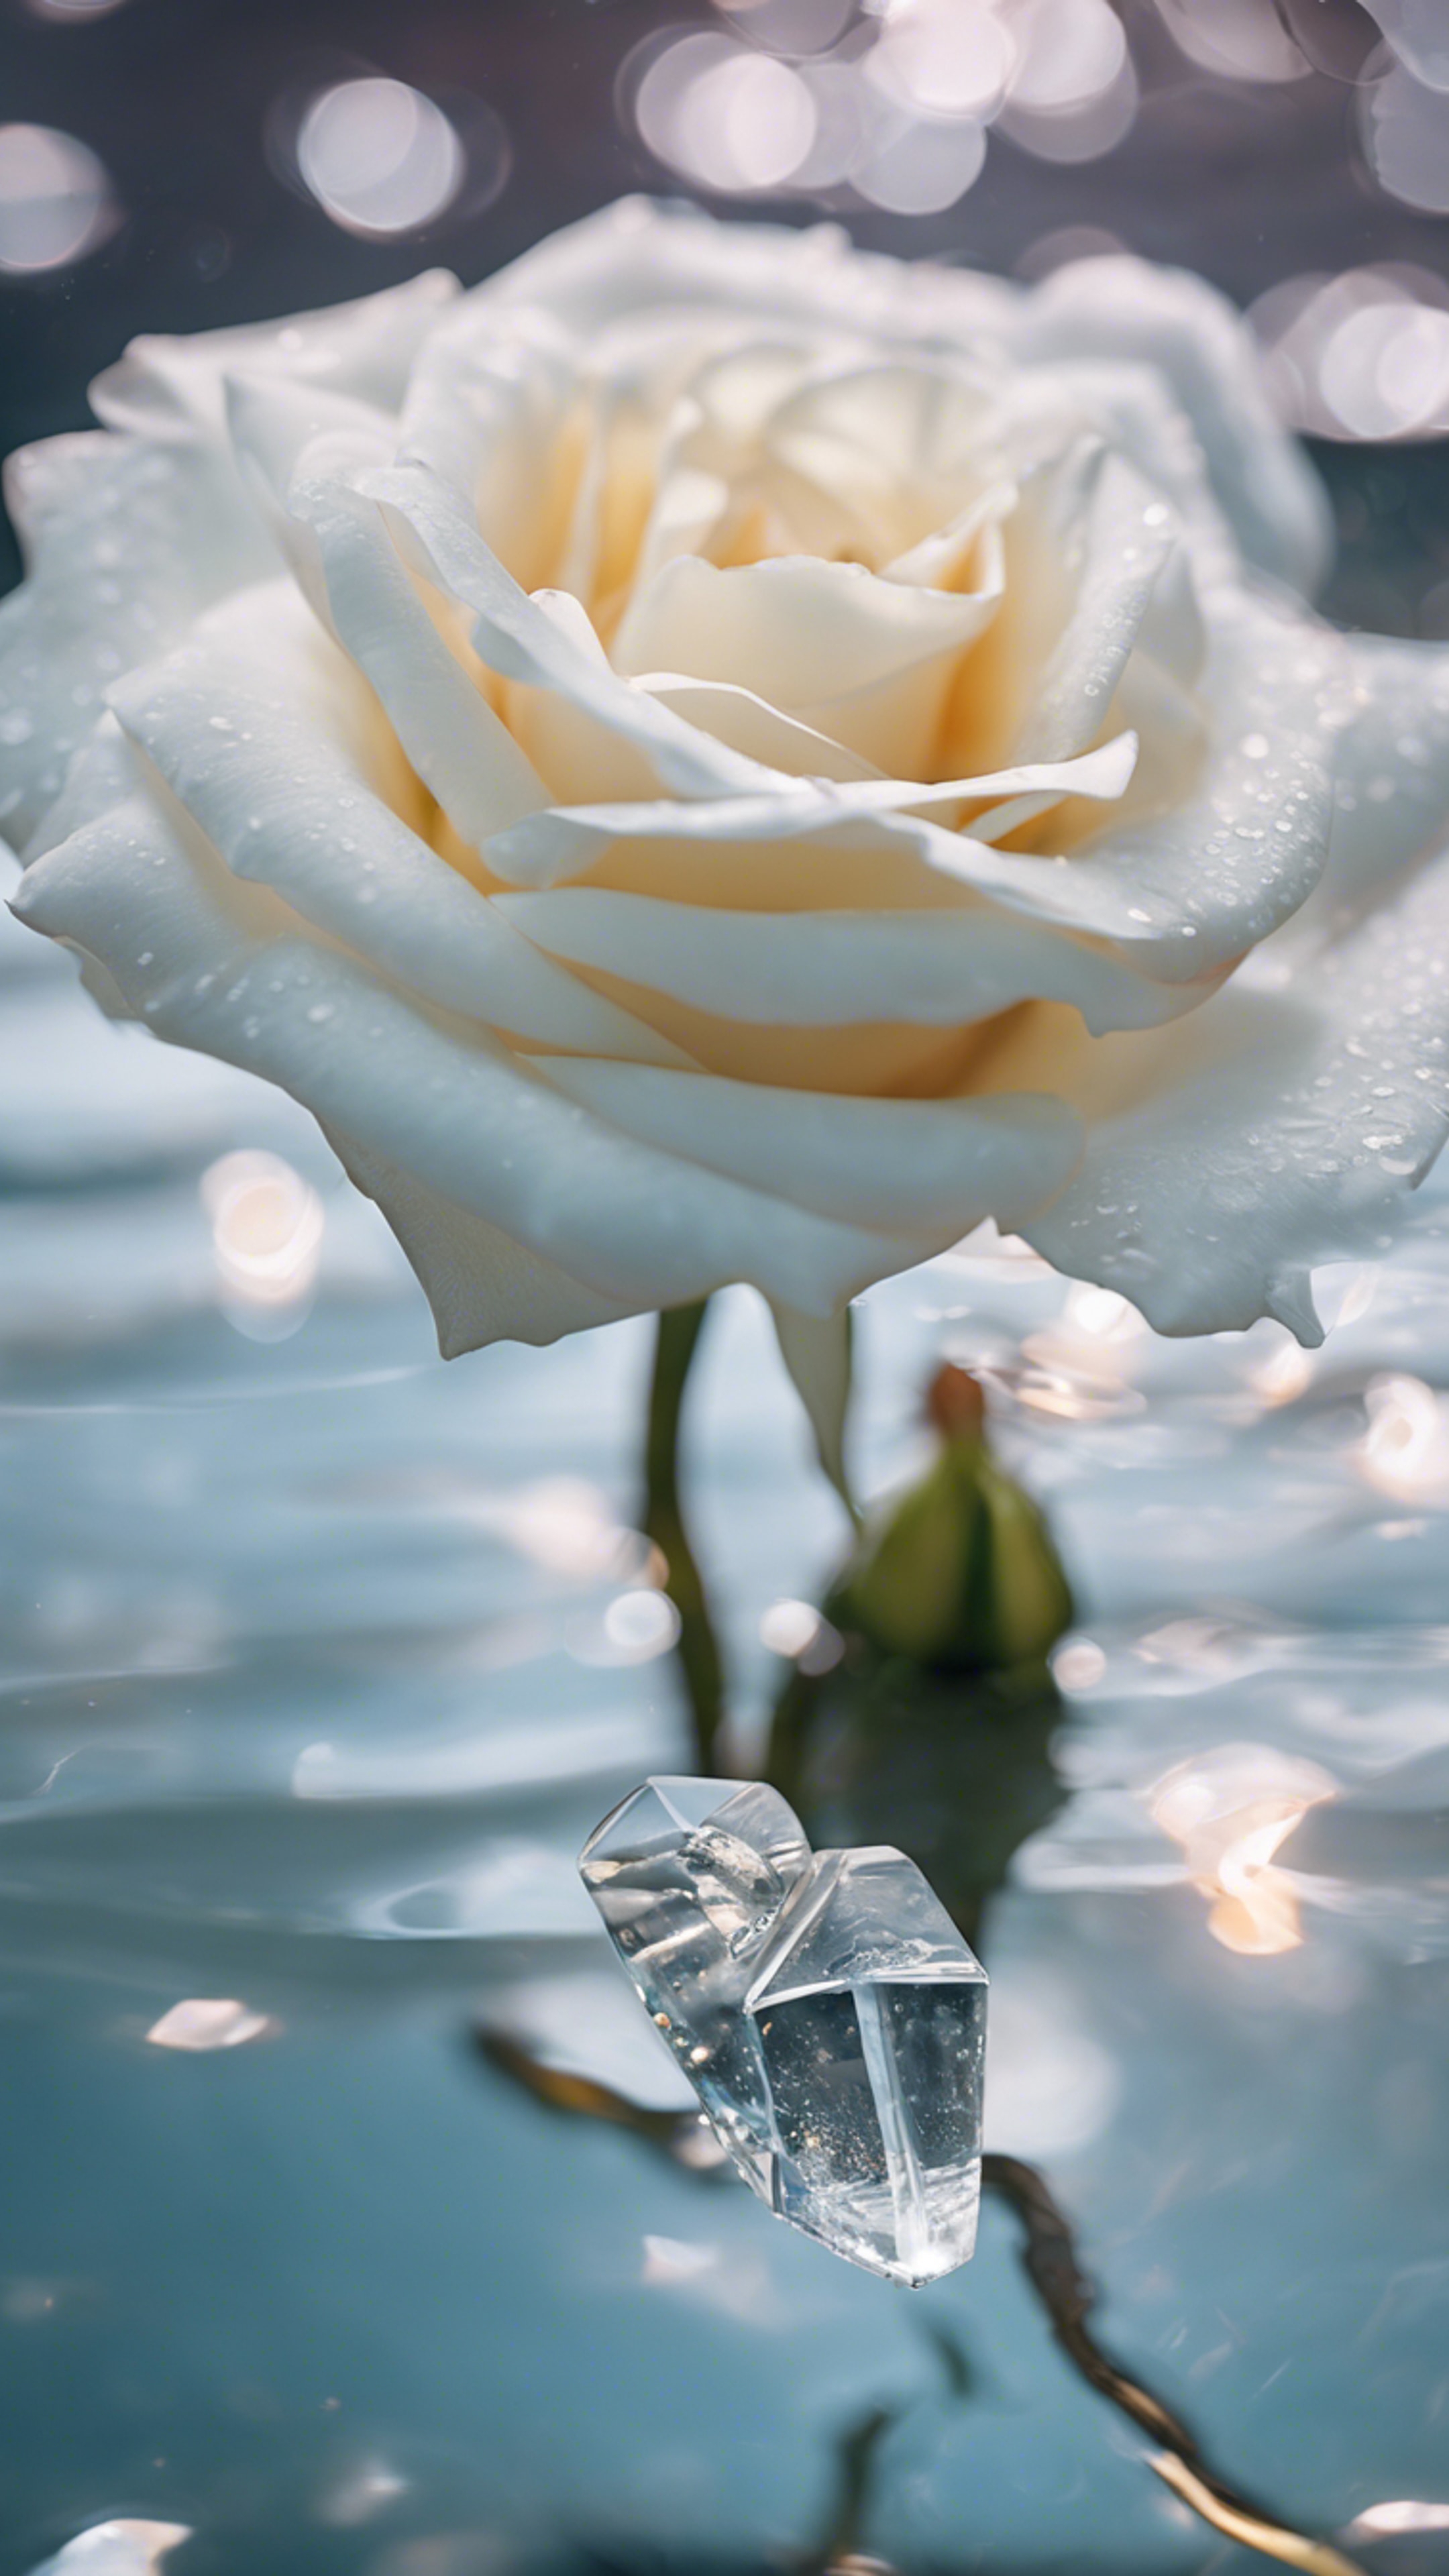 A white rose submerged in clear crystal water, petals gracefully spreading. Kertas dinding[af81d3e8e21443b29805]